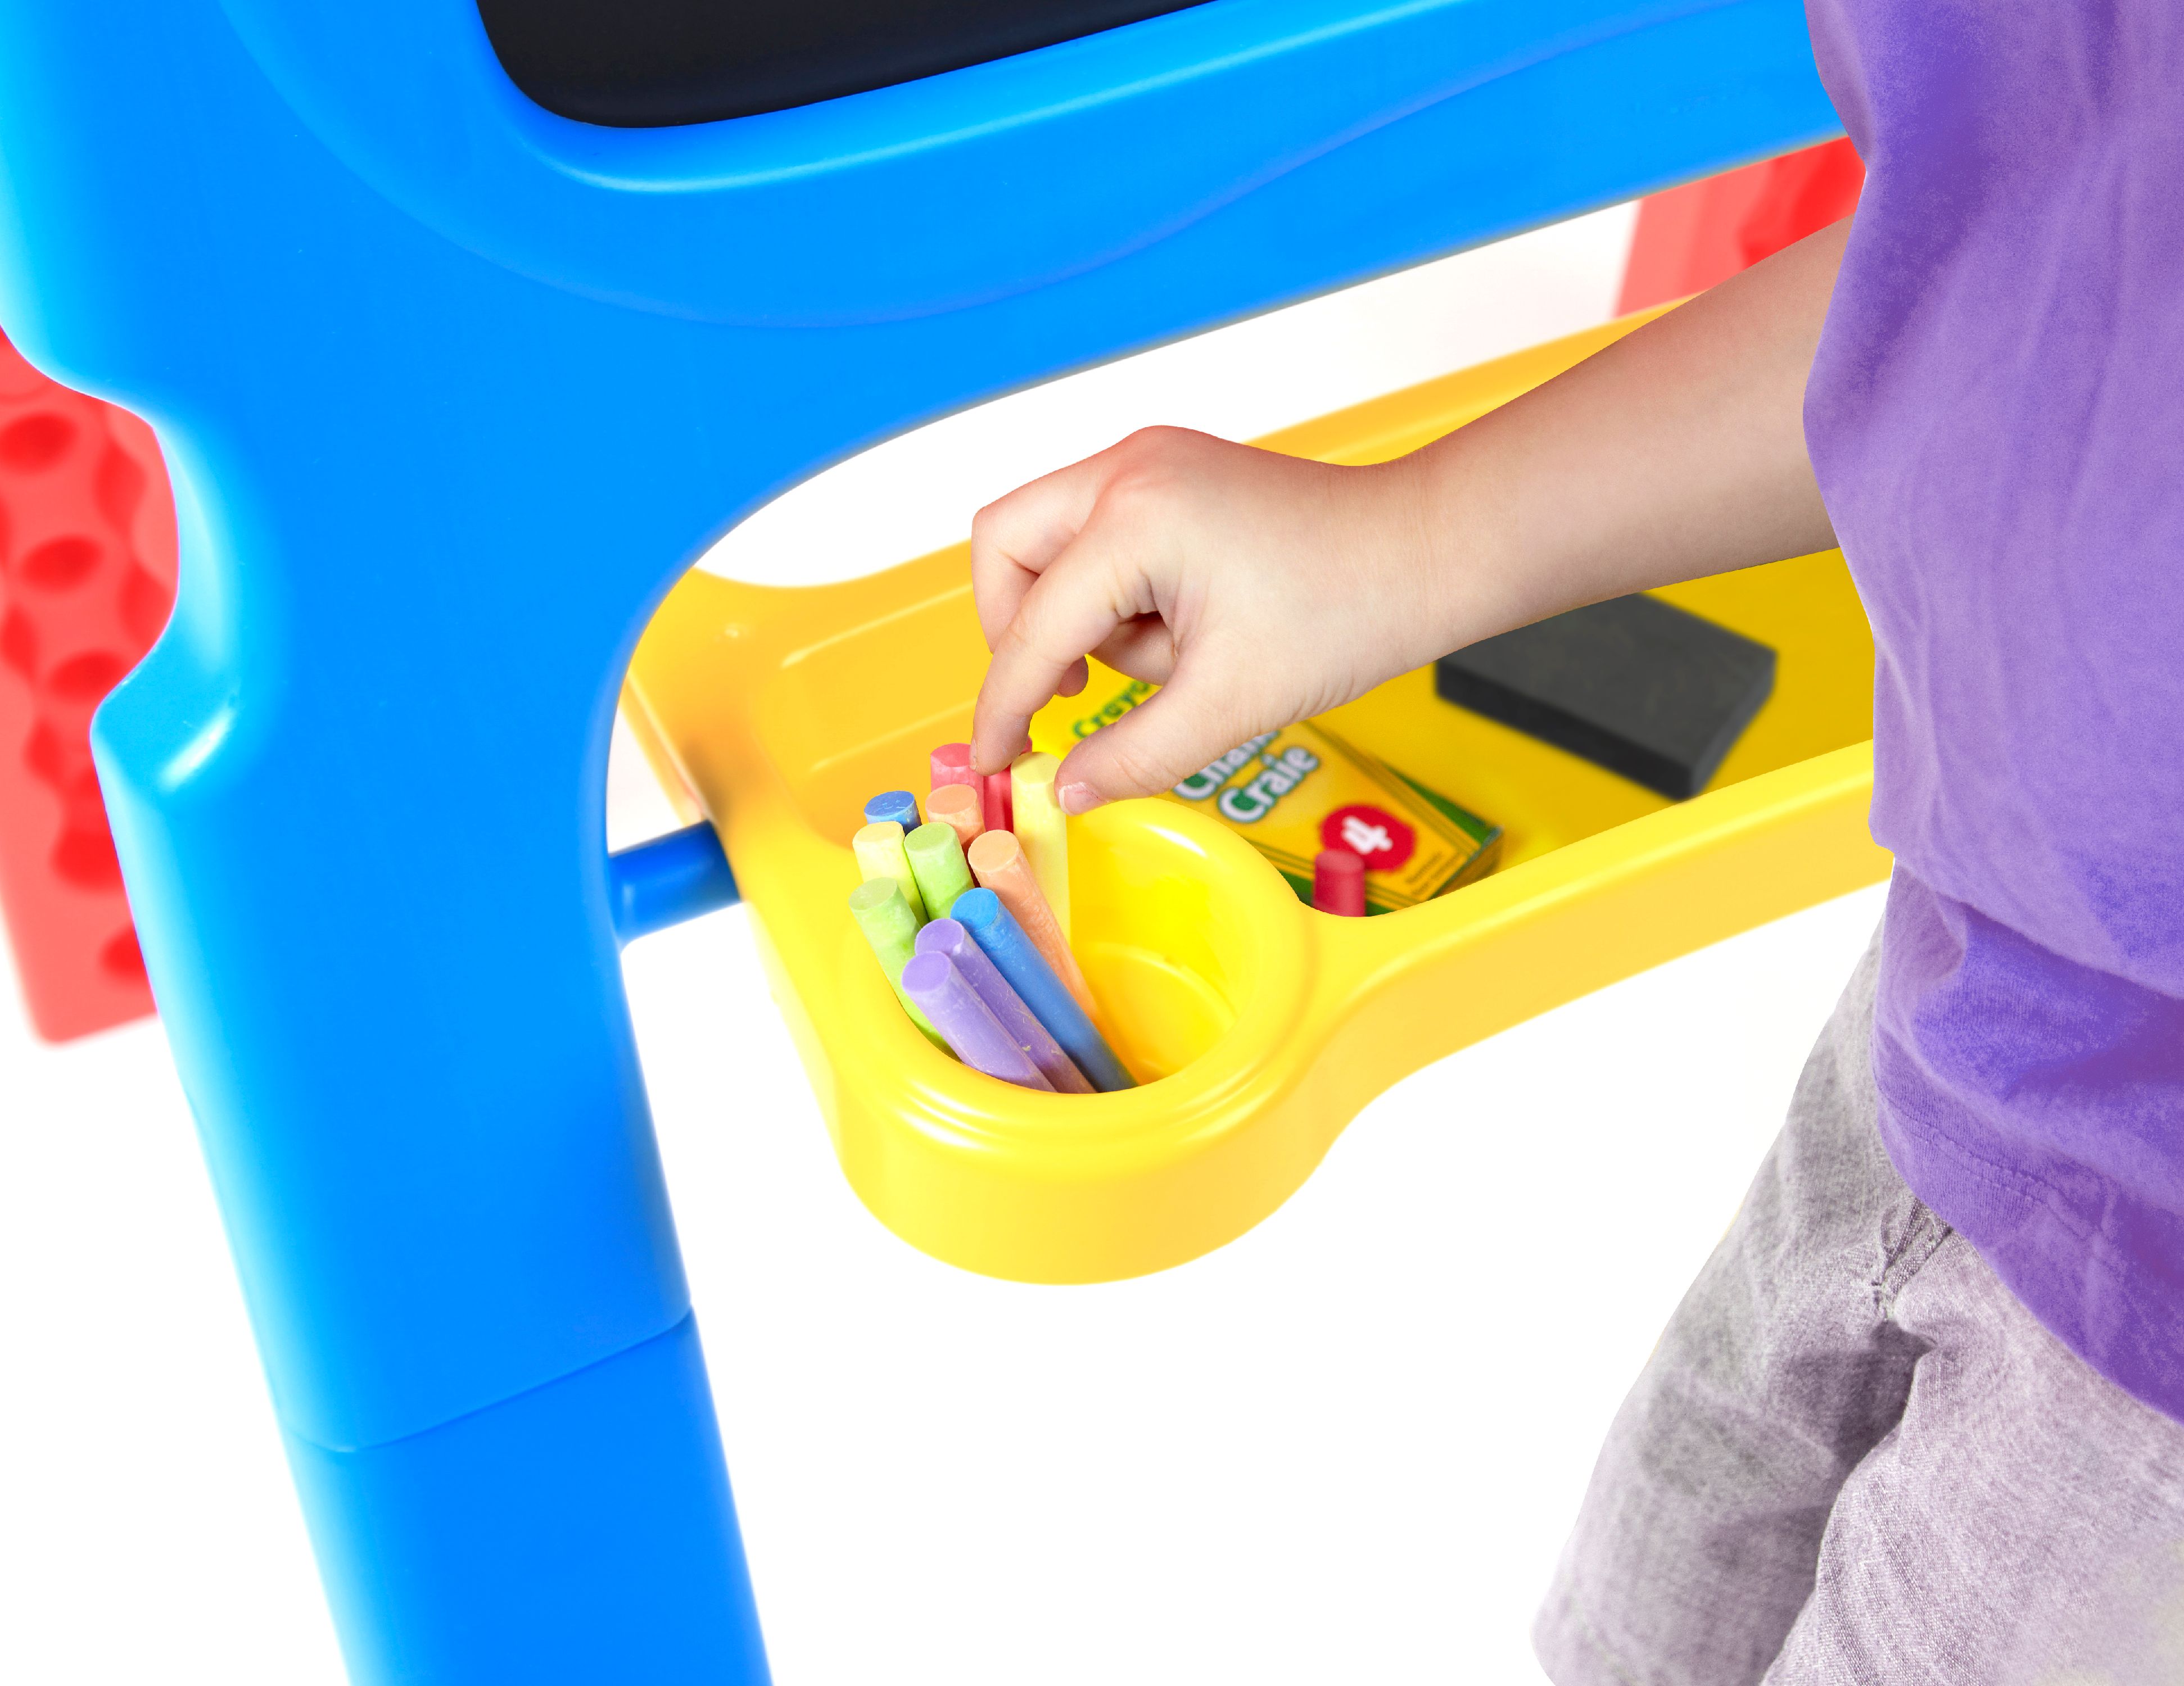 Crayola 3-in-1 Double Easel with Magnetic Letters (Blue, Red) - image 4 of 4